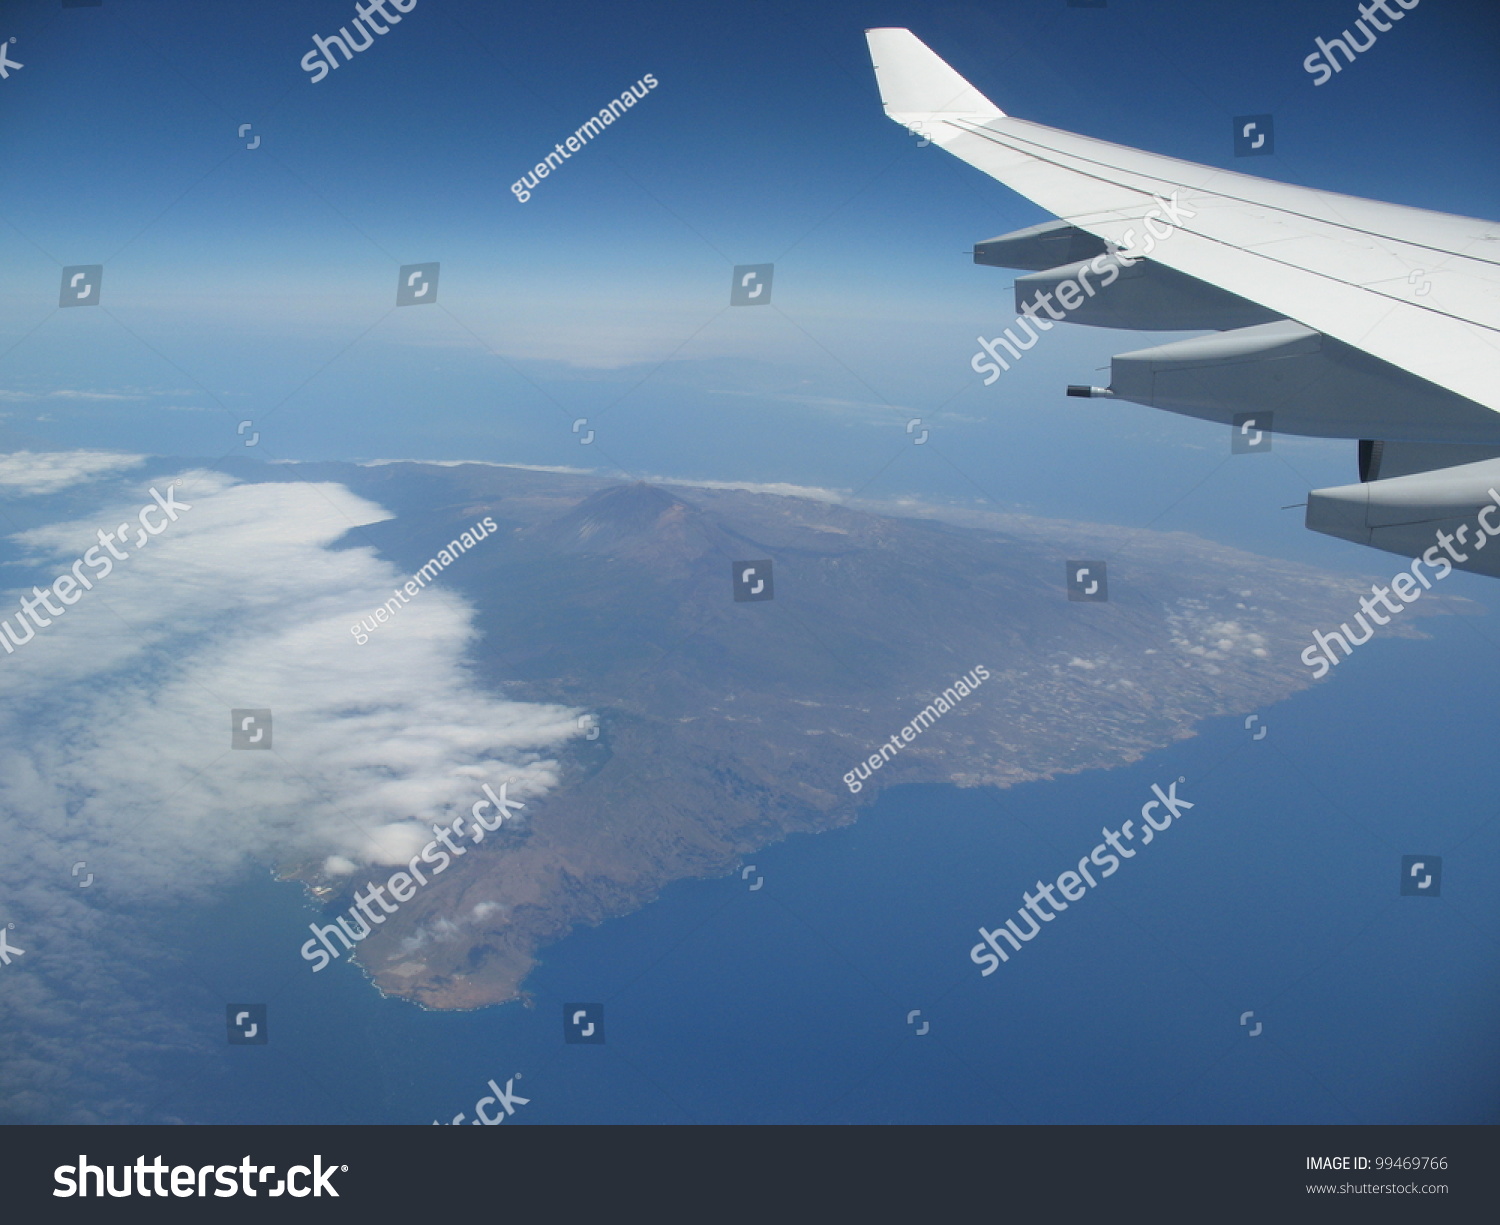 View from the plane on the island of Tenerife, Spain #99469766